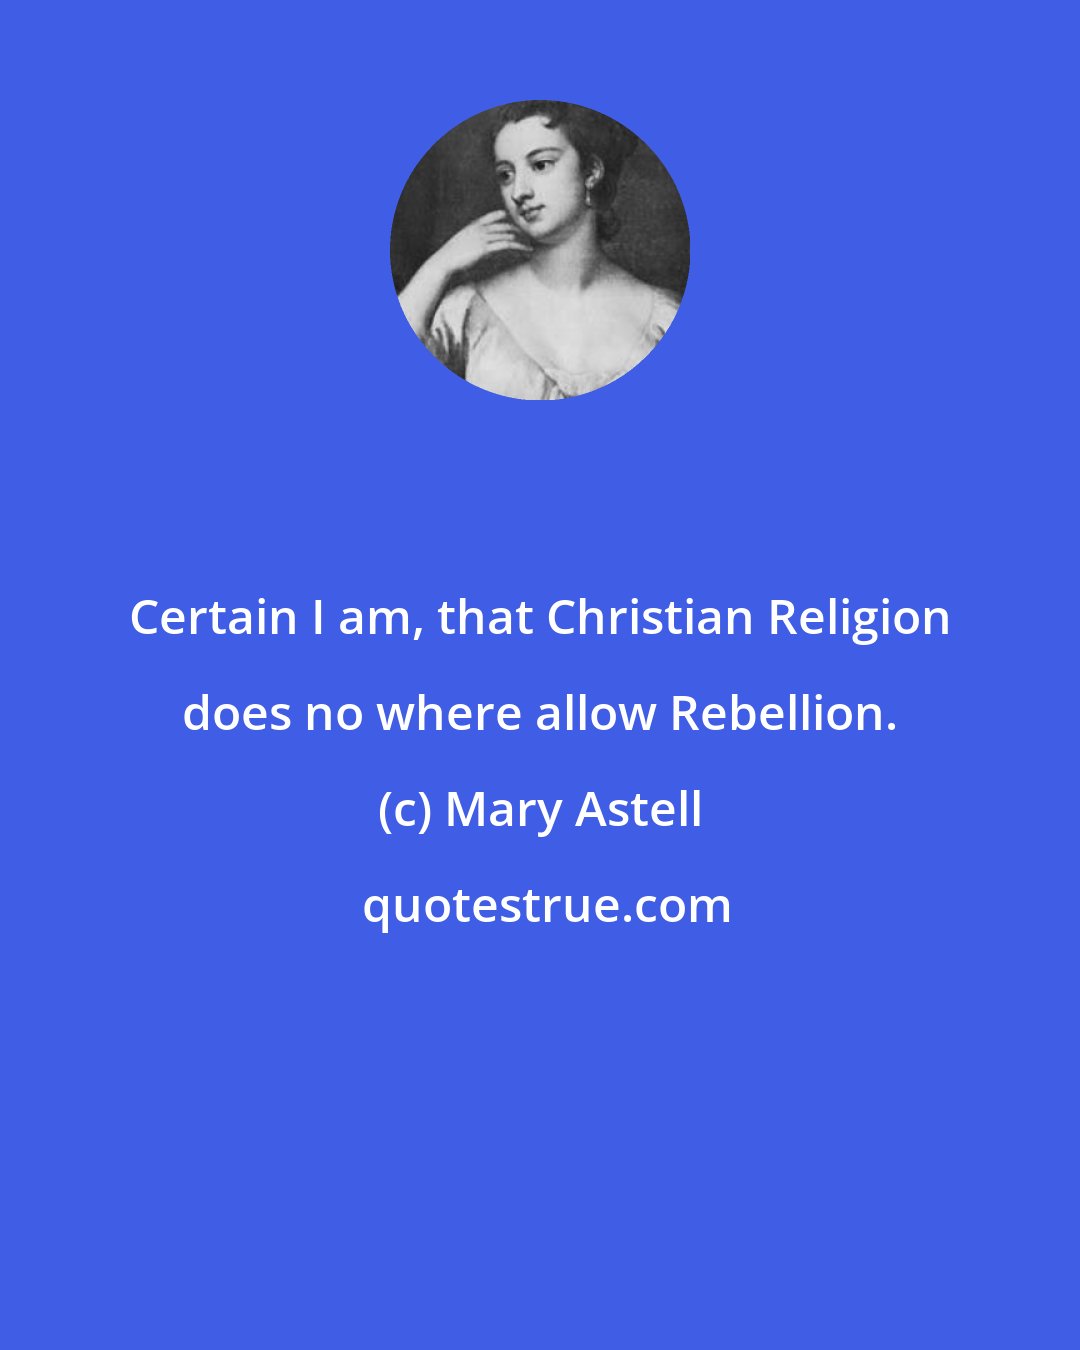 Mary Astell: Certain I am, that Christian Religion does no where allow Rebellion.